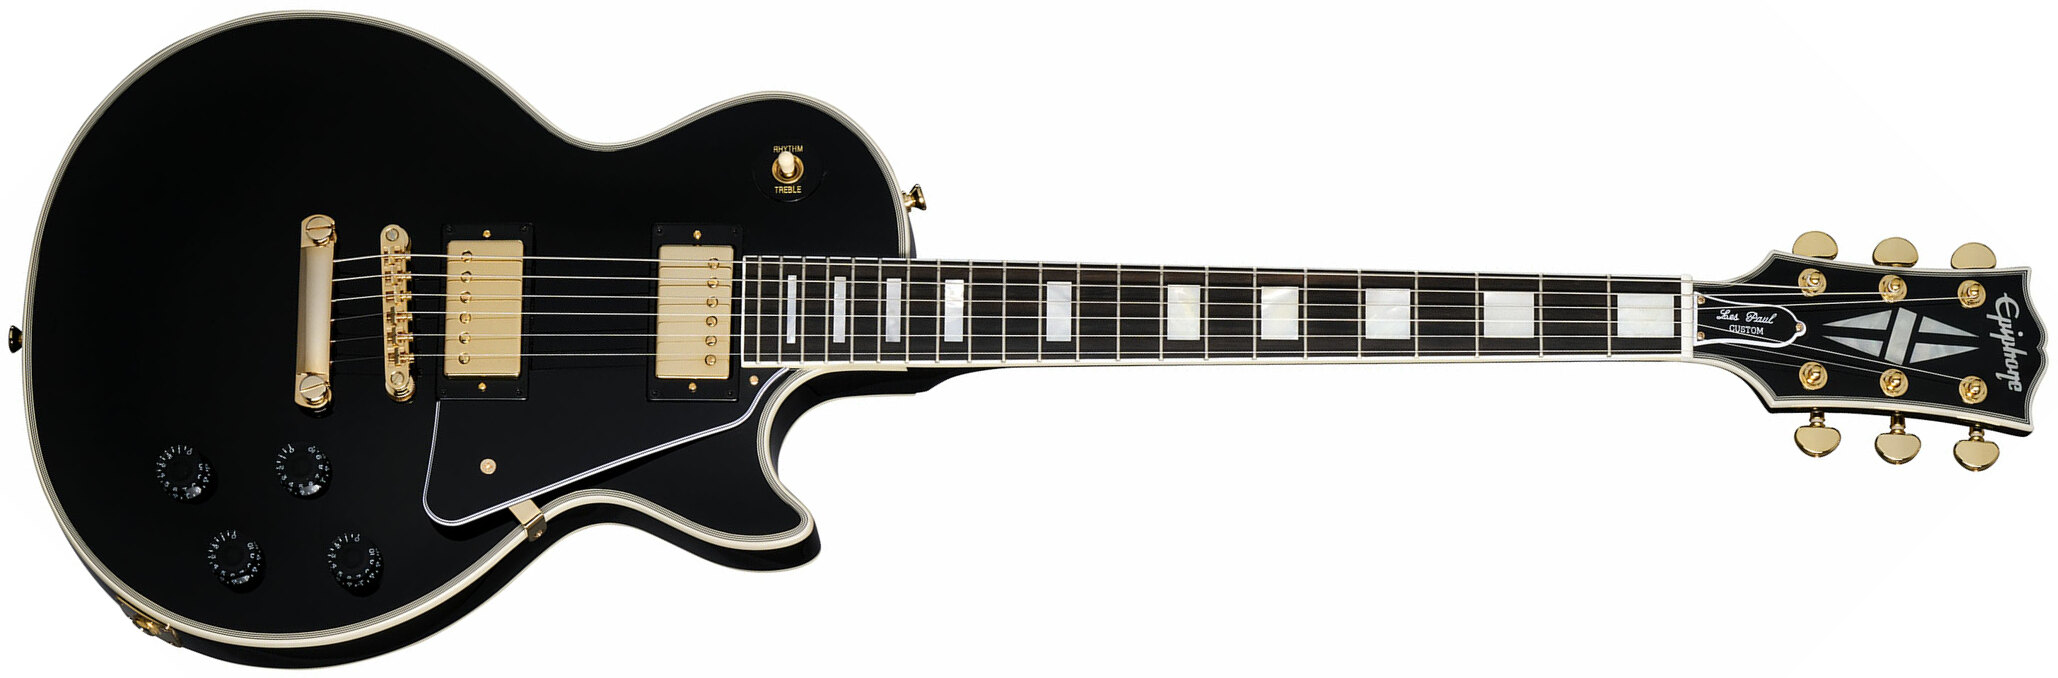 Epiphone Les Paul Custom Inspired By 2h Ht Eb - Ebony - Single cut electric guitar - Main picture